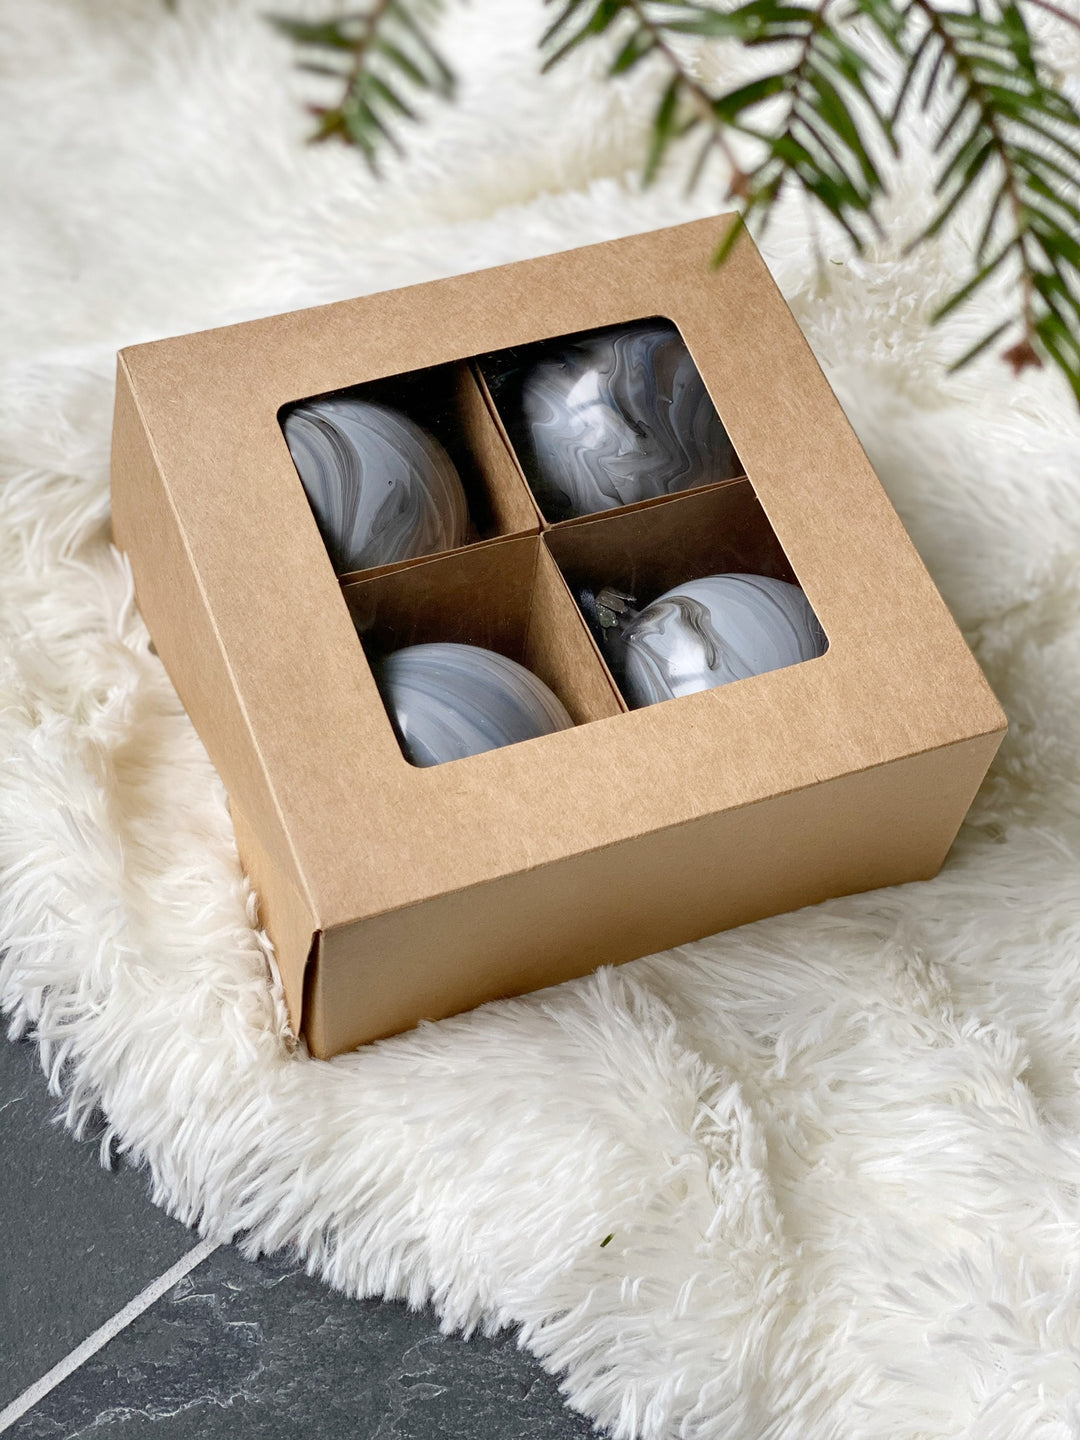 Hand-Dipped Holiday Ornaments, Night Dreams Collection